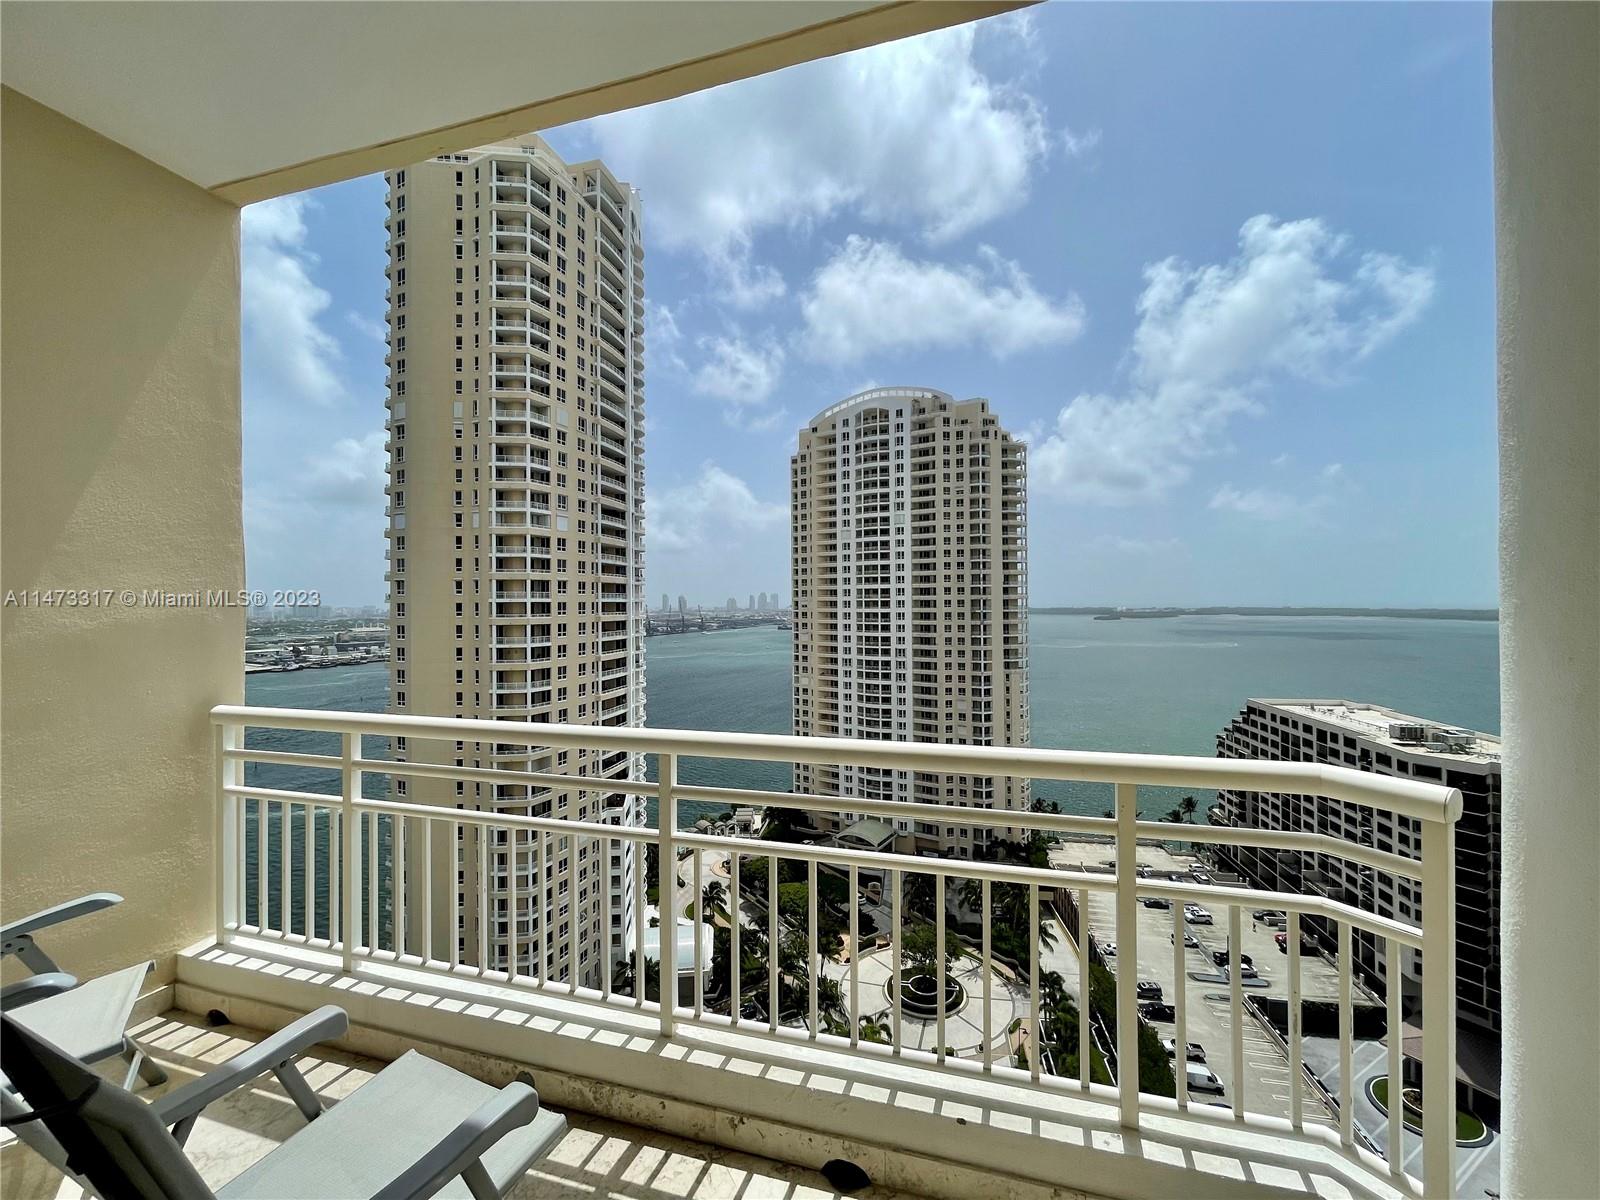 Stunning bay views from this 1 Bed/1.5 Bath with wraparound balcony furnished corner unit in Brickell Key. Most desirable line 05 with no neighbors. Recently remodeled closet, bathrooms. Floor to ceiling windows. Marble flooring throughout. Large master bedroom with walk in closet. Live within the private community of Brickell key with restaurants, shops, and more. 1 Assigned Parking Space.